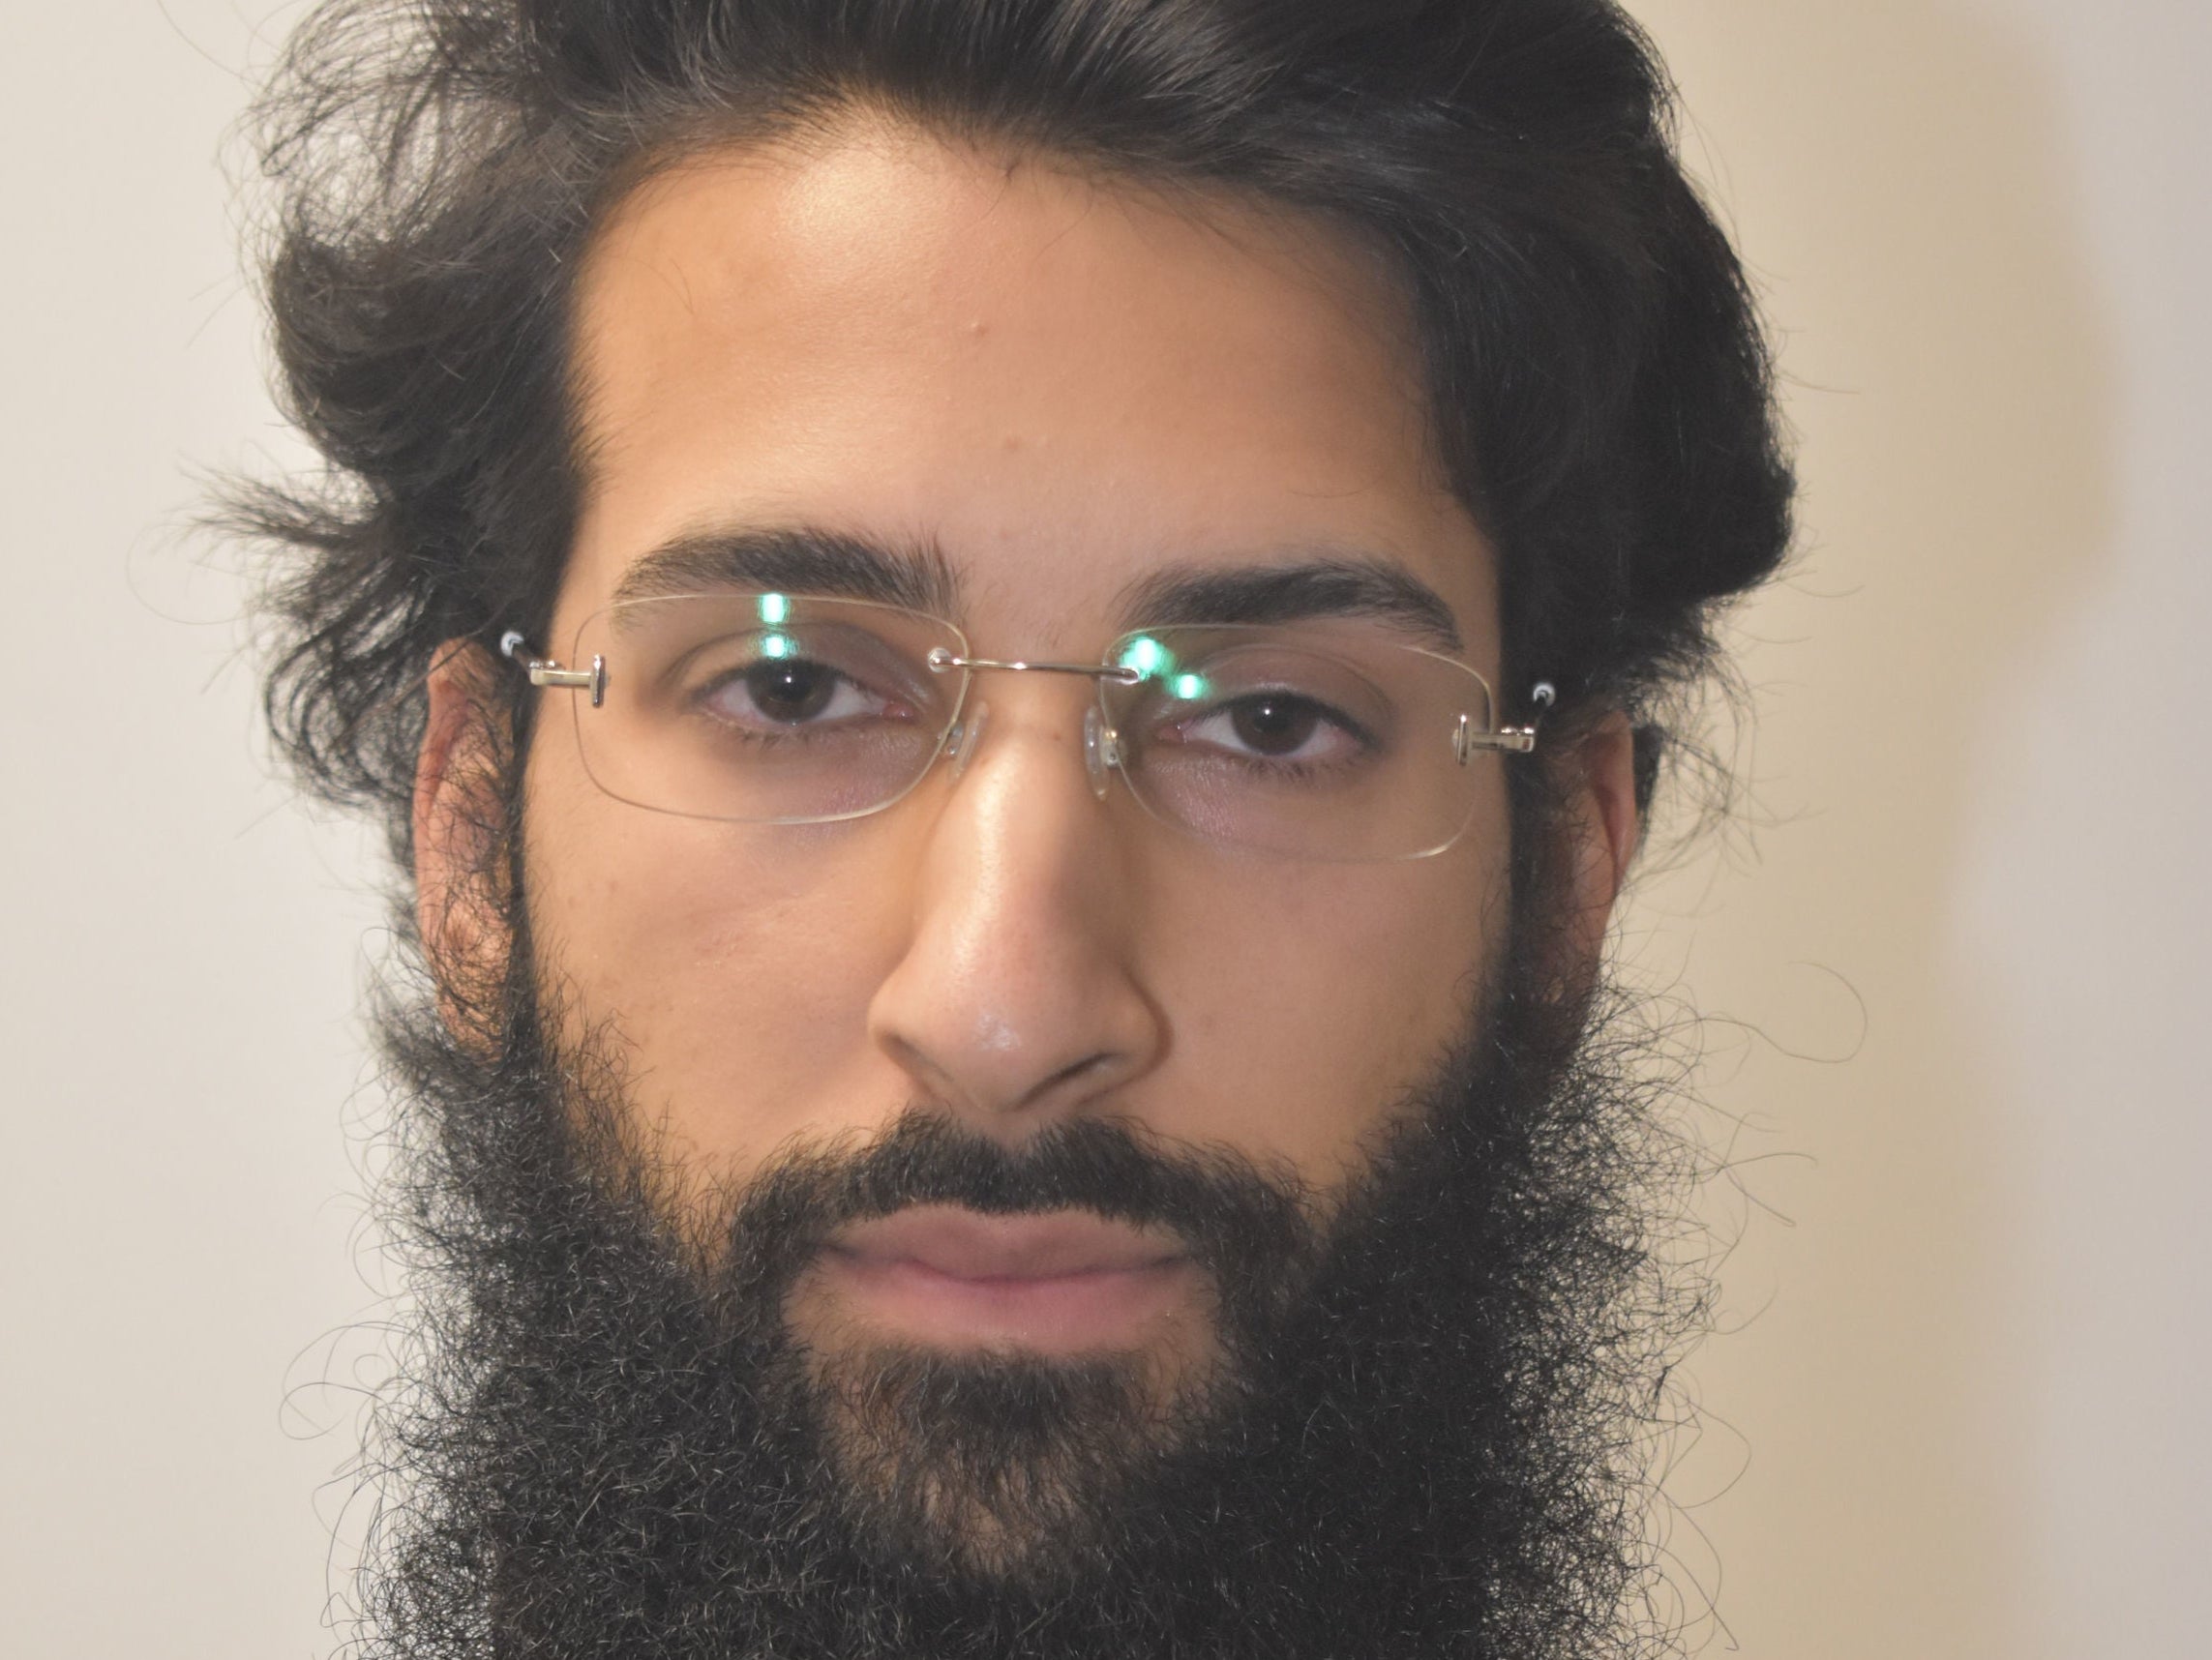 Hisham Chaudhary was convicted of Isis membership and other terrorism offences